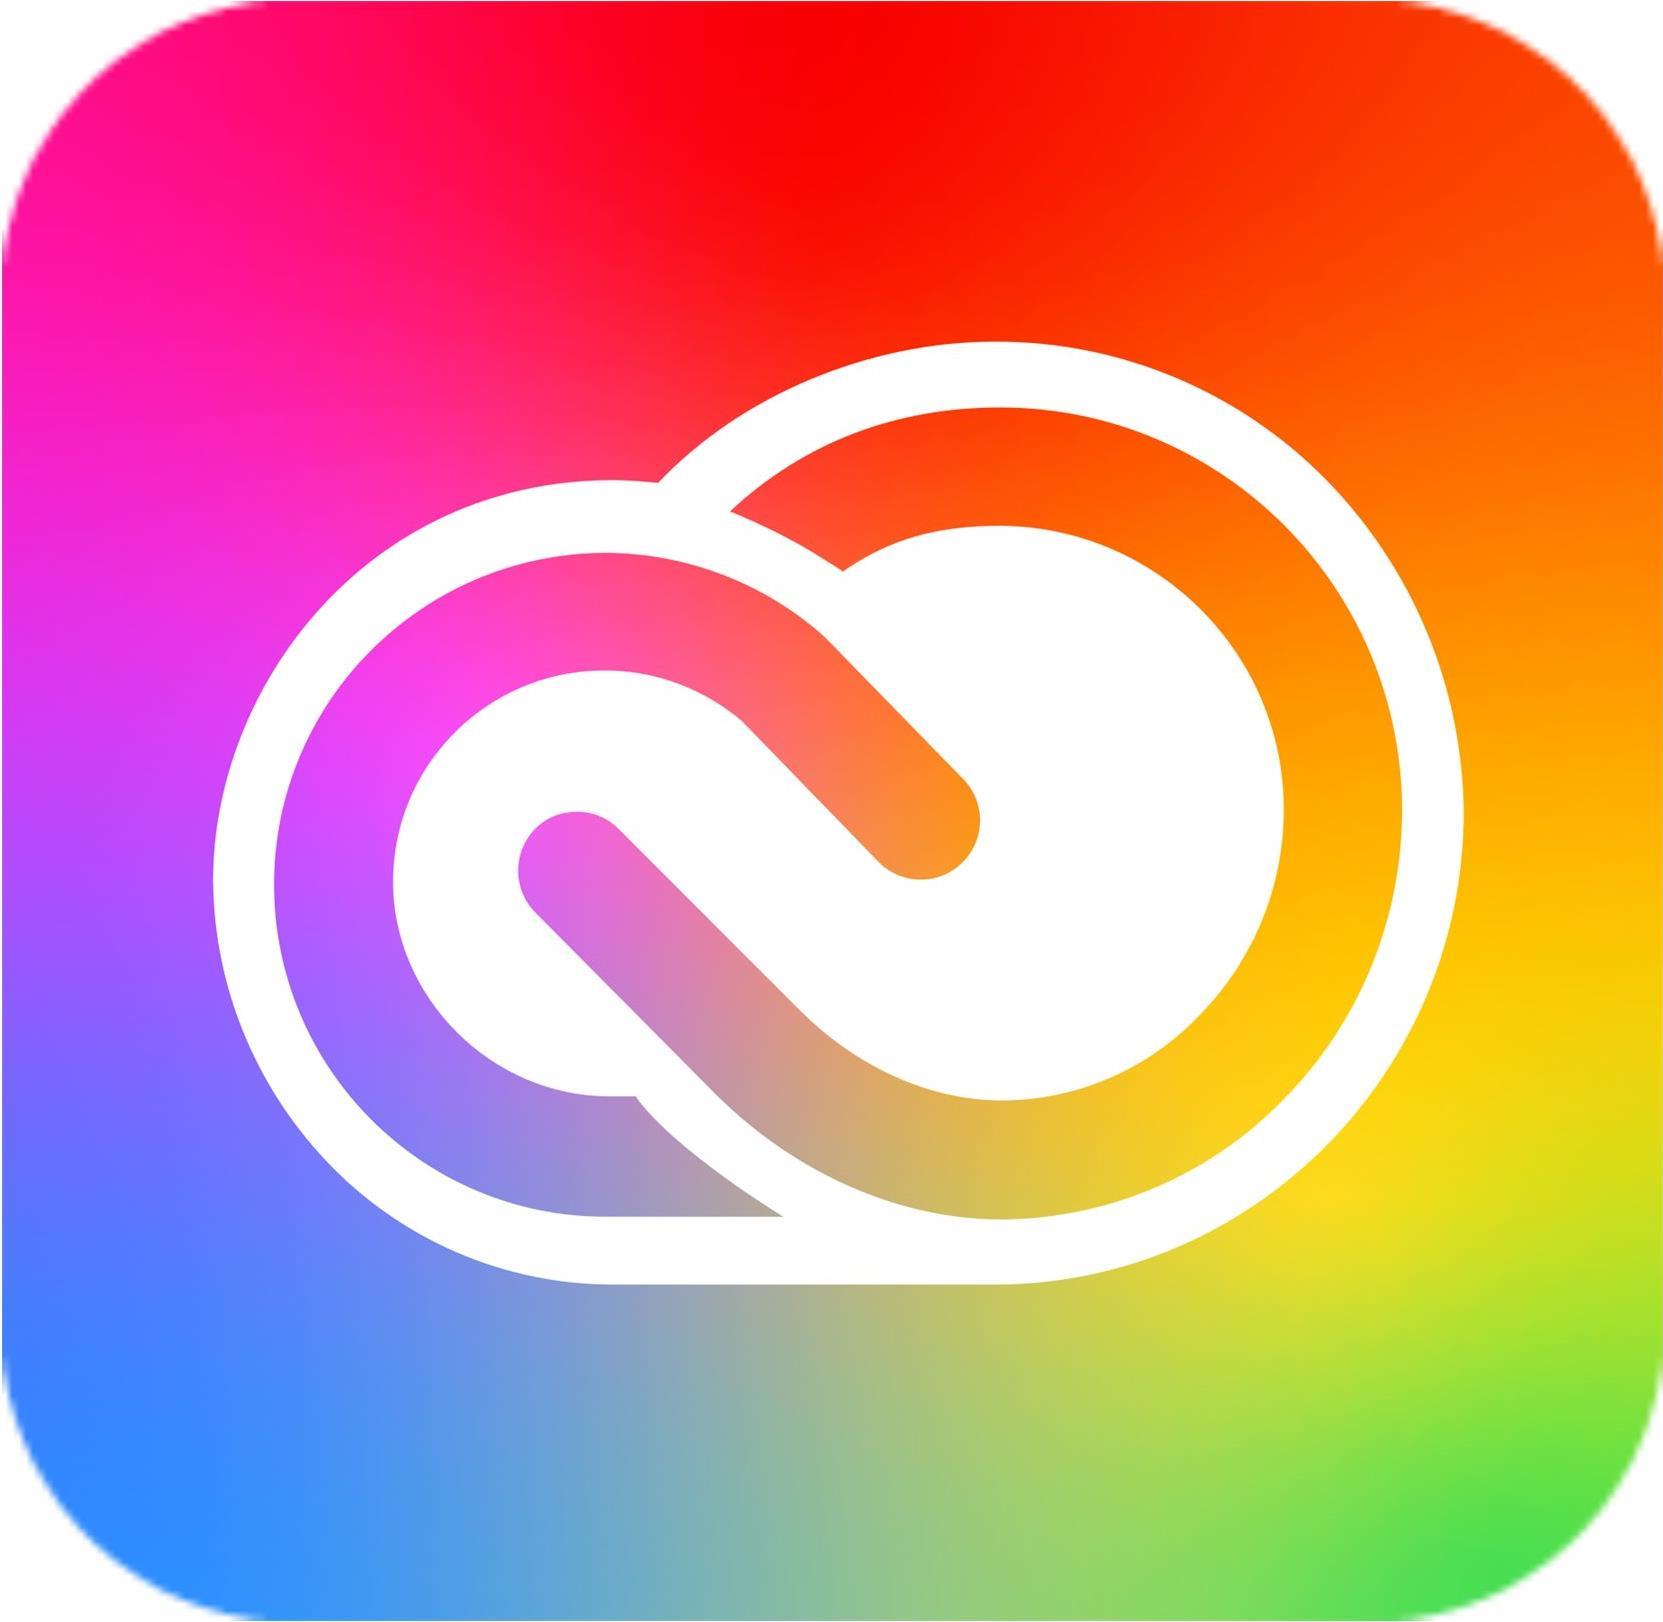 Adobe Creative Cloud for teams - All Apps - Subscription Renewal - 1 Benutzer - VIP Select - Stufe 14 (100+) - 3 years commitment - Win, Mac - Multi European Languages von Adobe